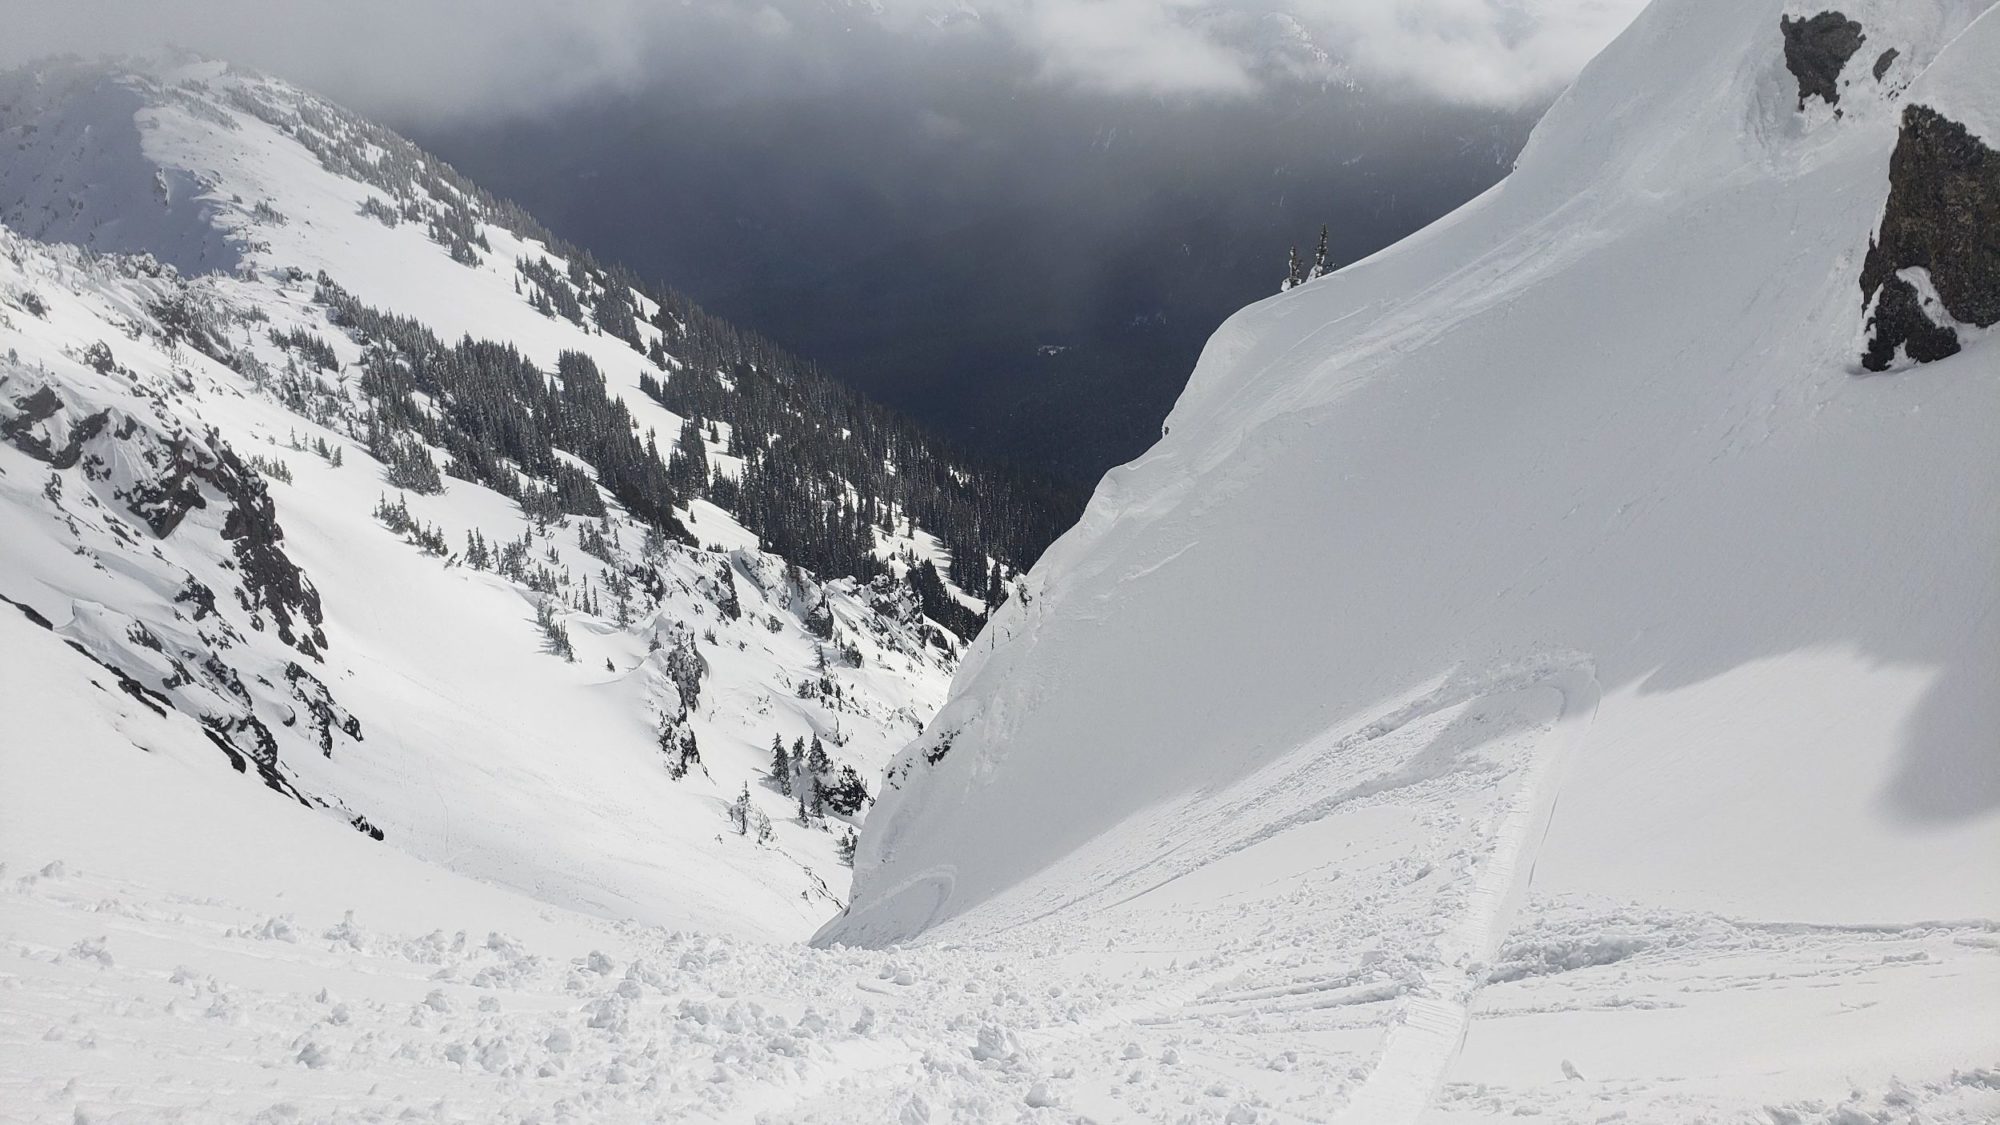 couloir that skiers were using to descend mount angeles